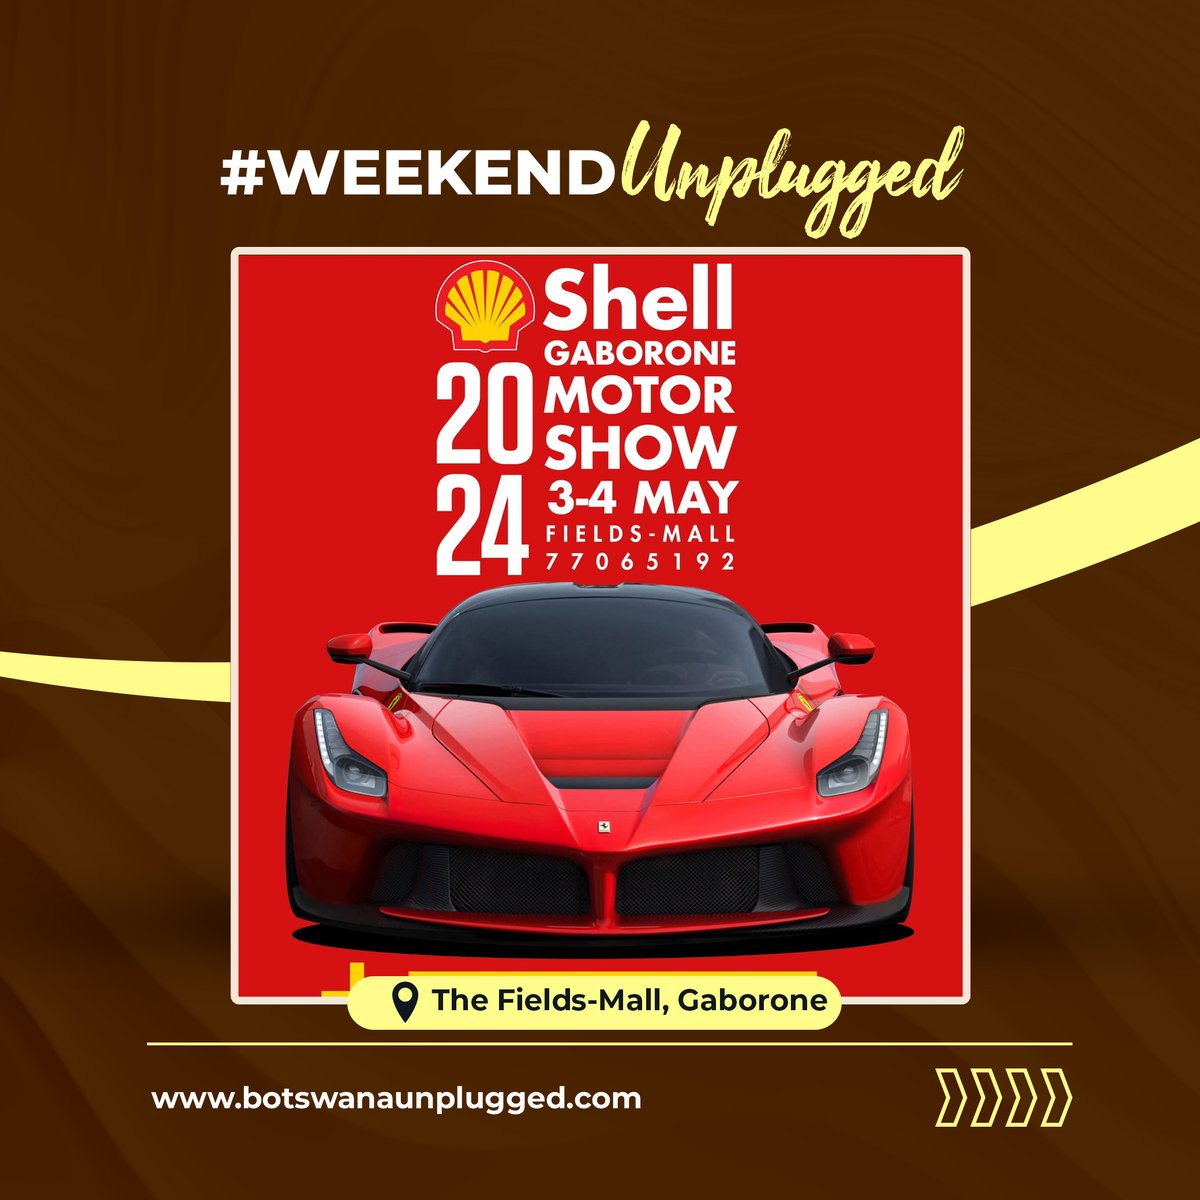 𝗢𝗡 𝗙𝗥𝗜𝗗𝗔𝗬𝗦, 𝗪𝗘 𝗨𝗡𝗣𝗟𝗨𝗚🔌🔌🔌!:This weekend is hella packed with AWESOME events for you to jump in on and you know we got you 😉👇. From the thrilling Khawa dunes to the electrifying carshow, you have a lot to look forward to😎! #unpluggedweekends #gigguide…